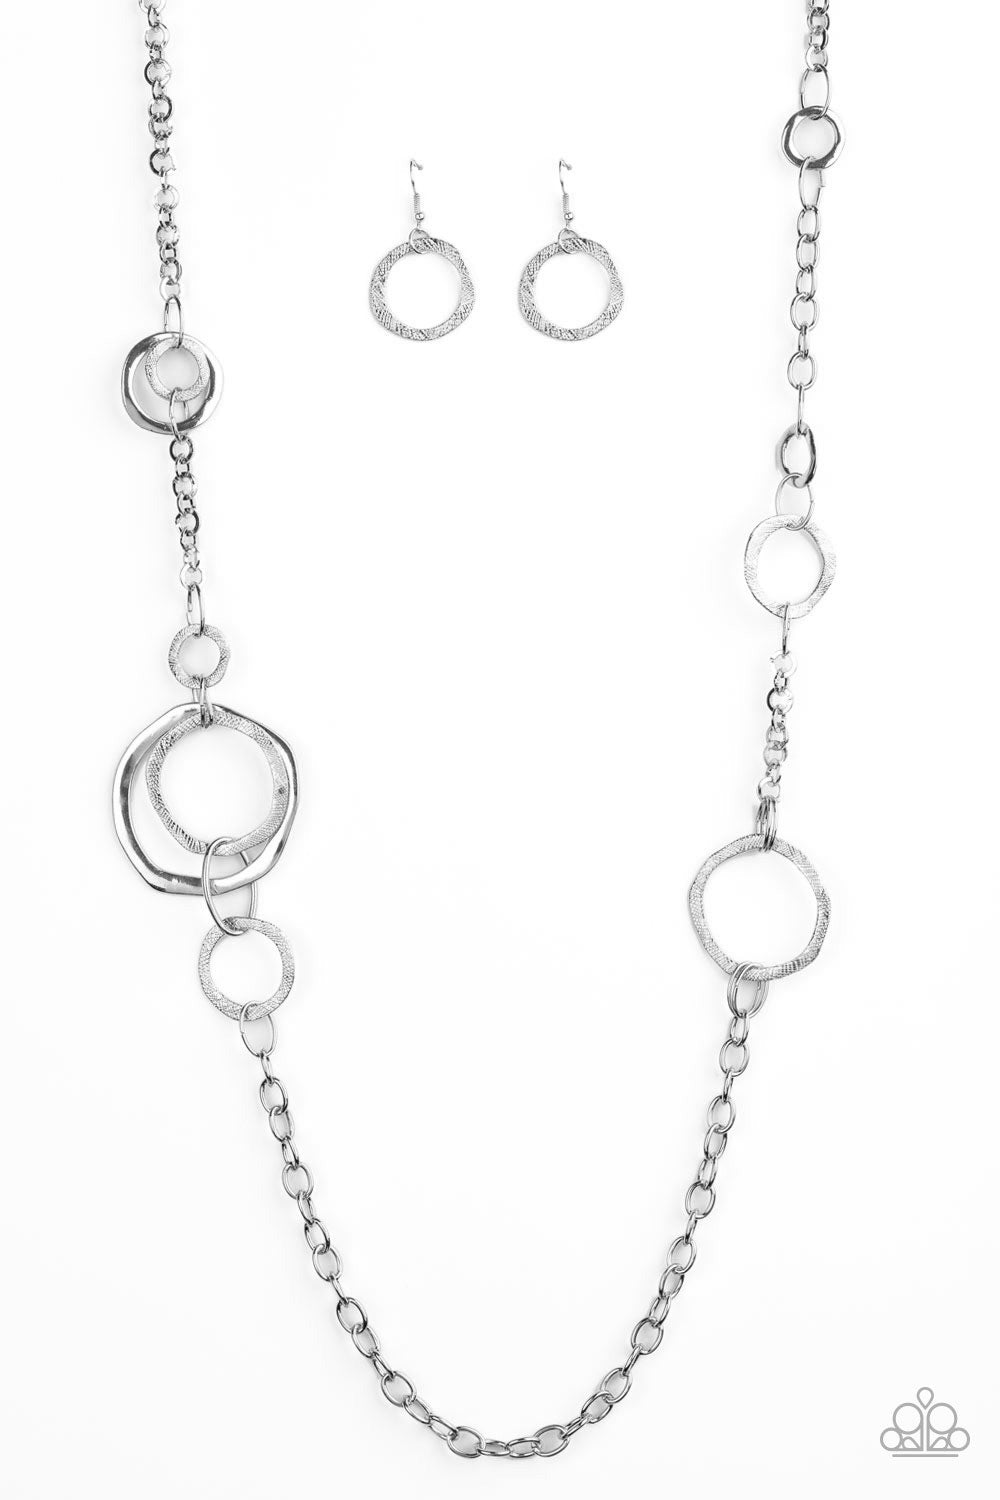 Paparazzi Necklace - Amped Up Metallics - Silver